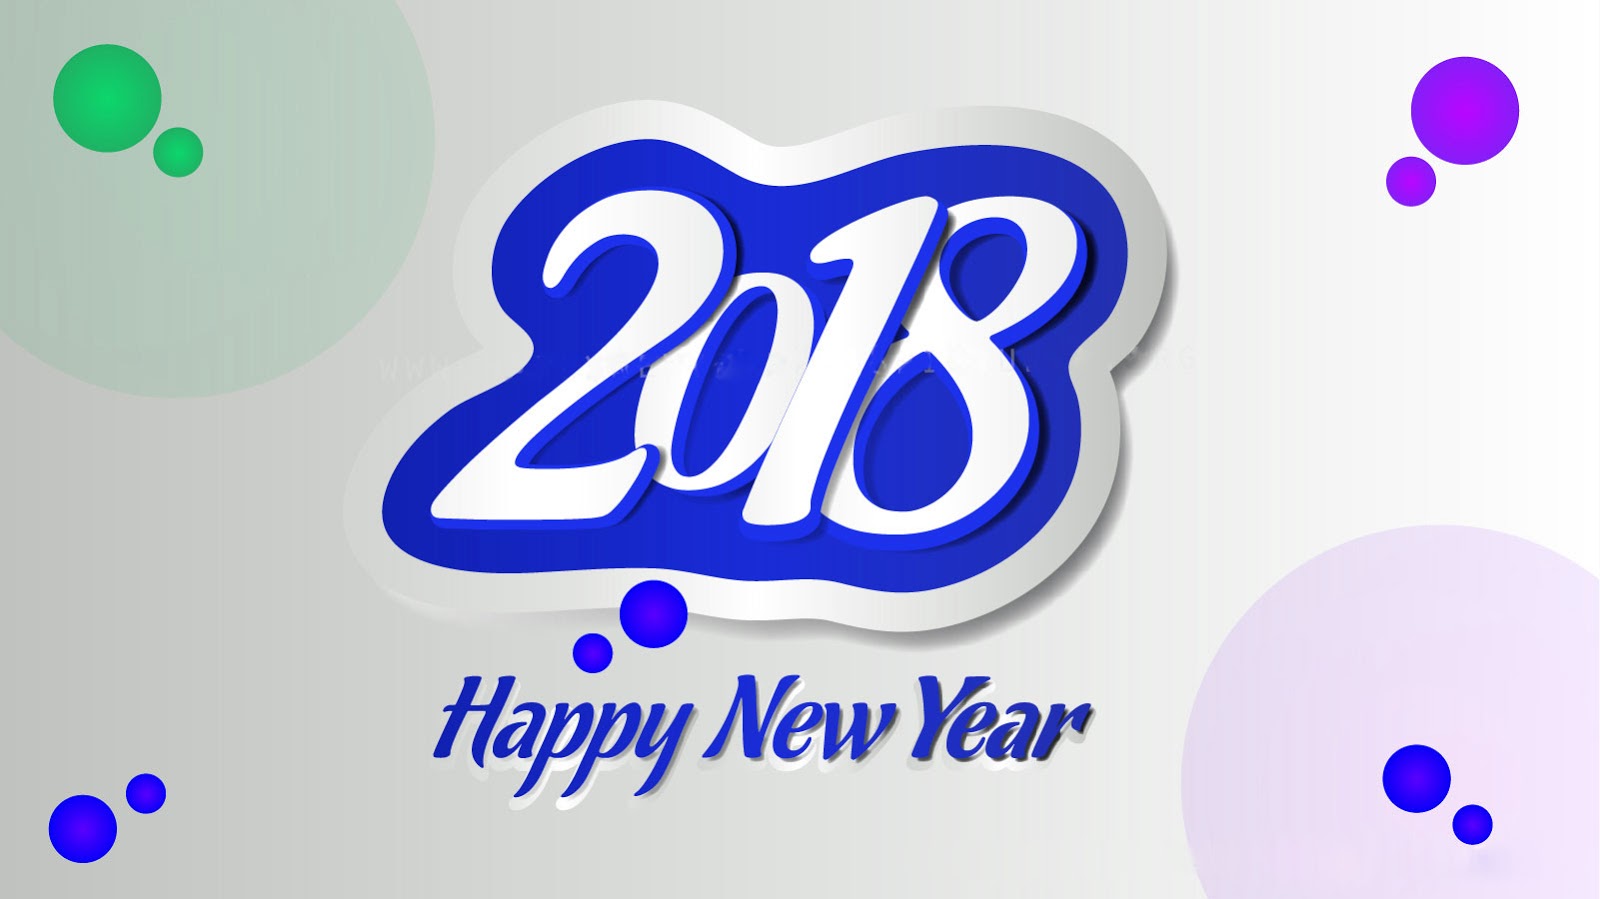 Happy New Year HD Wallpaper Image Pictures